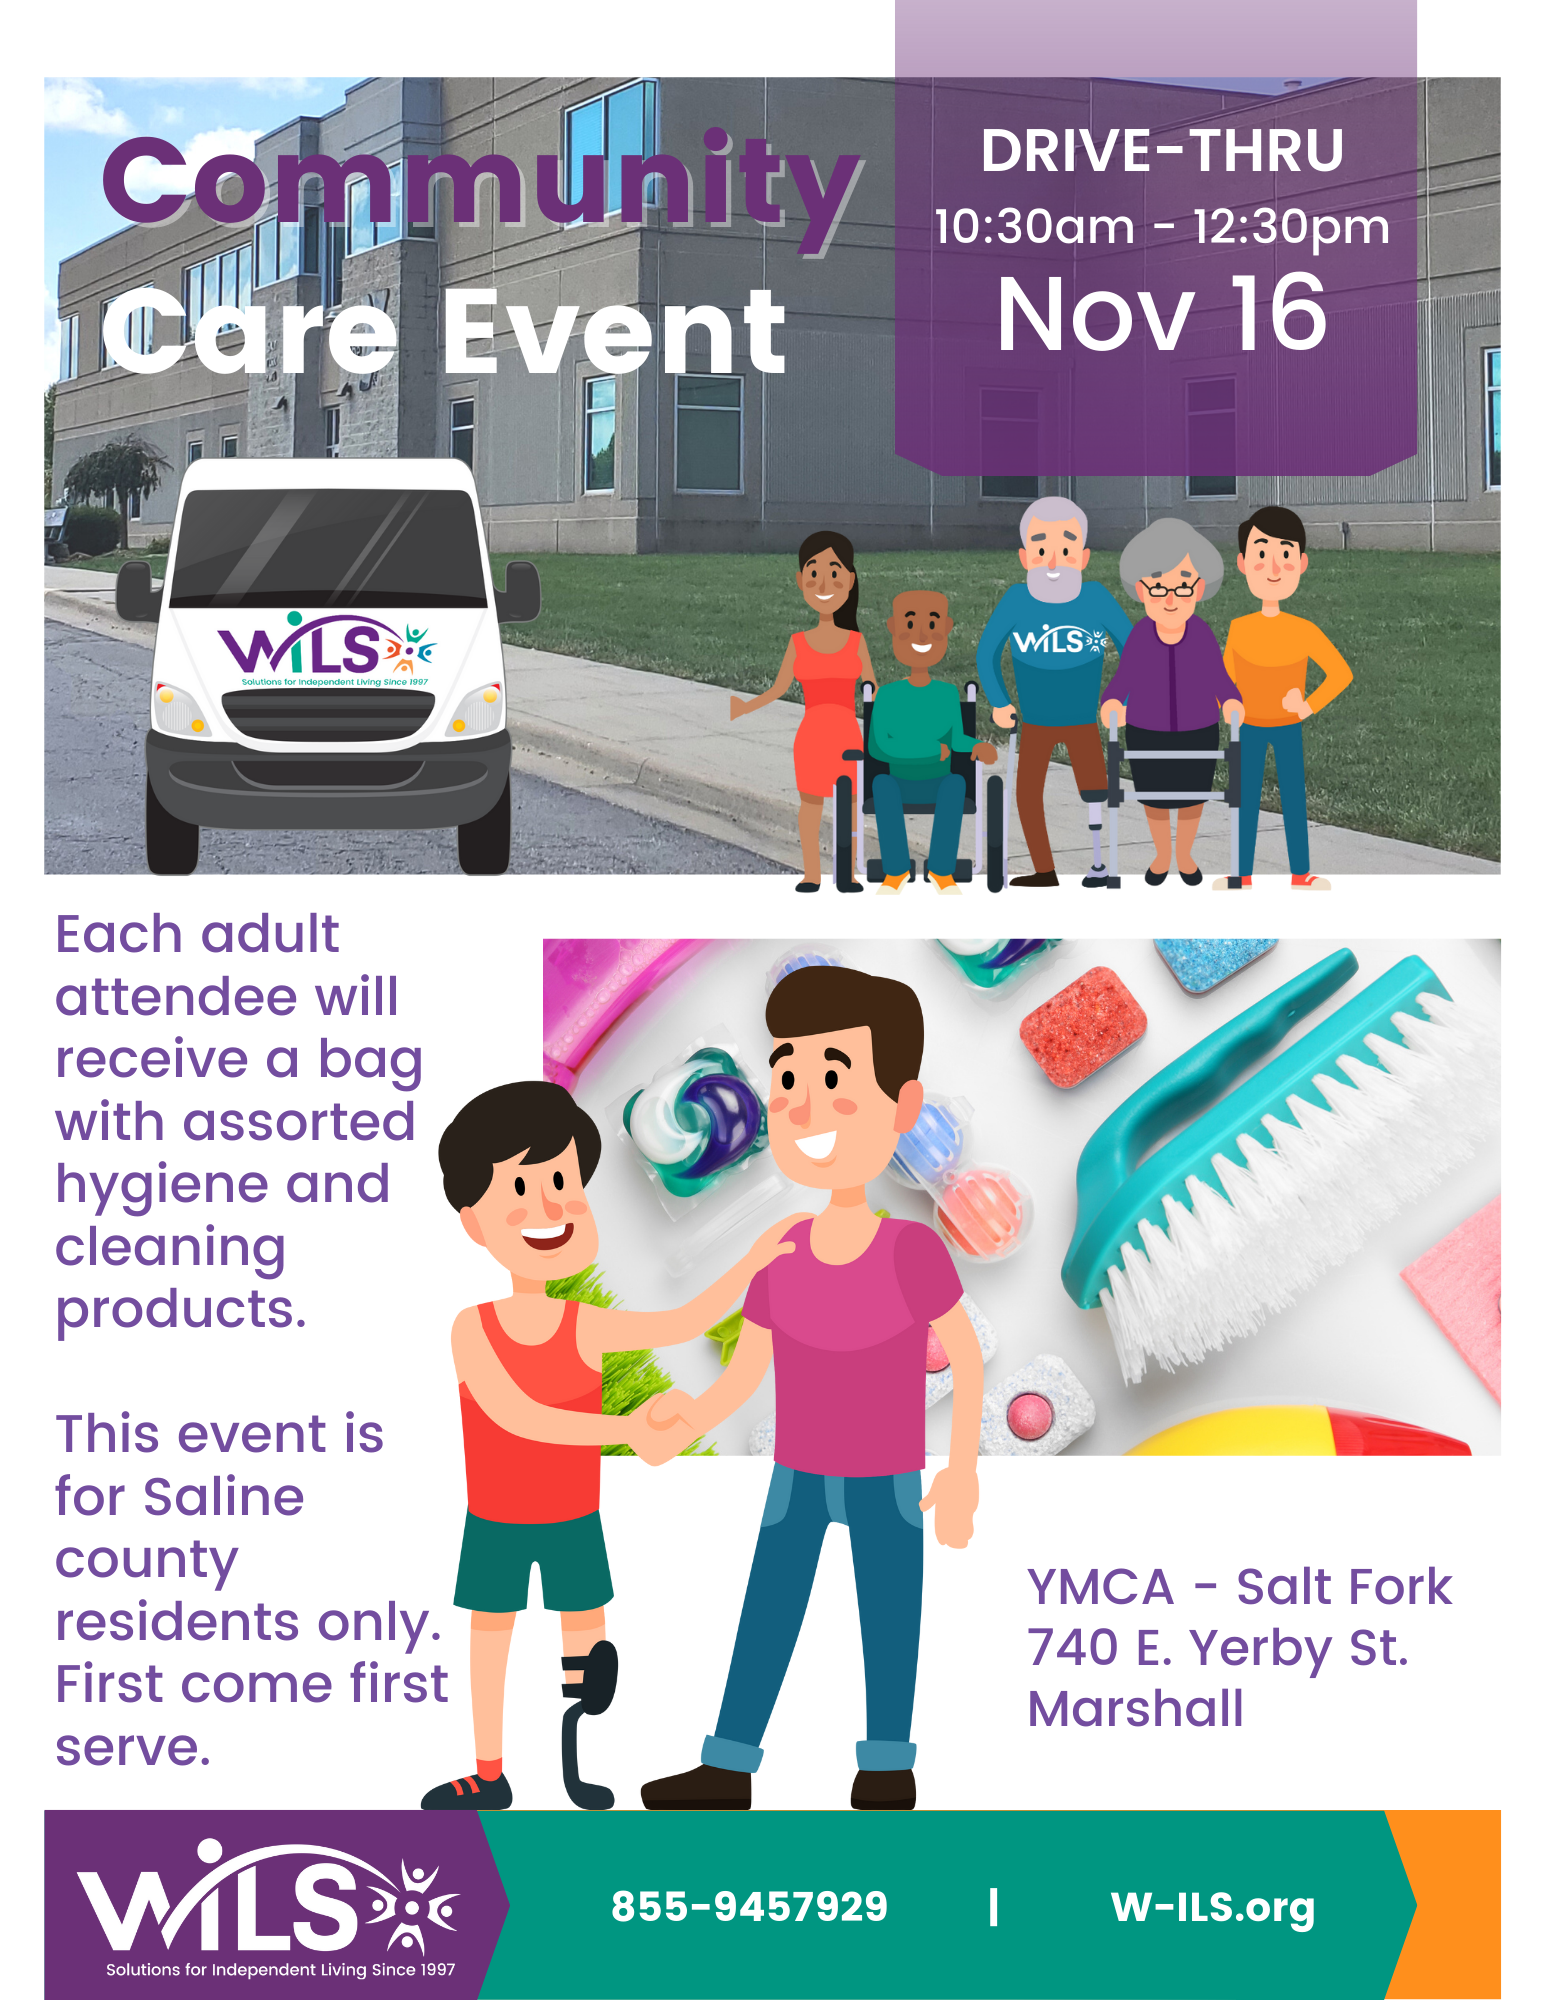 WILS is hosting a Community Care drive-thru event in Marshall. Each adult attendee will receive a FREE bag with assorted cleaning products and hygiene items. This event is for Saline county residents only. First come first serve. Nov 16, 10:30am - 12:30pm